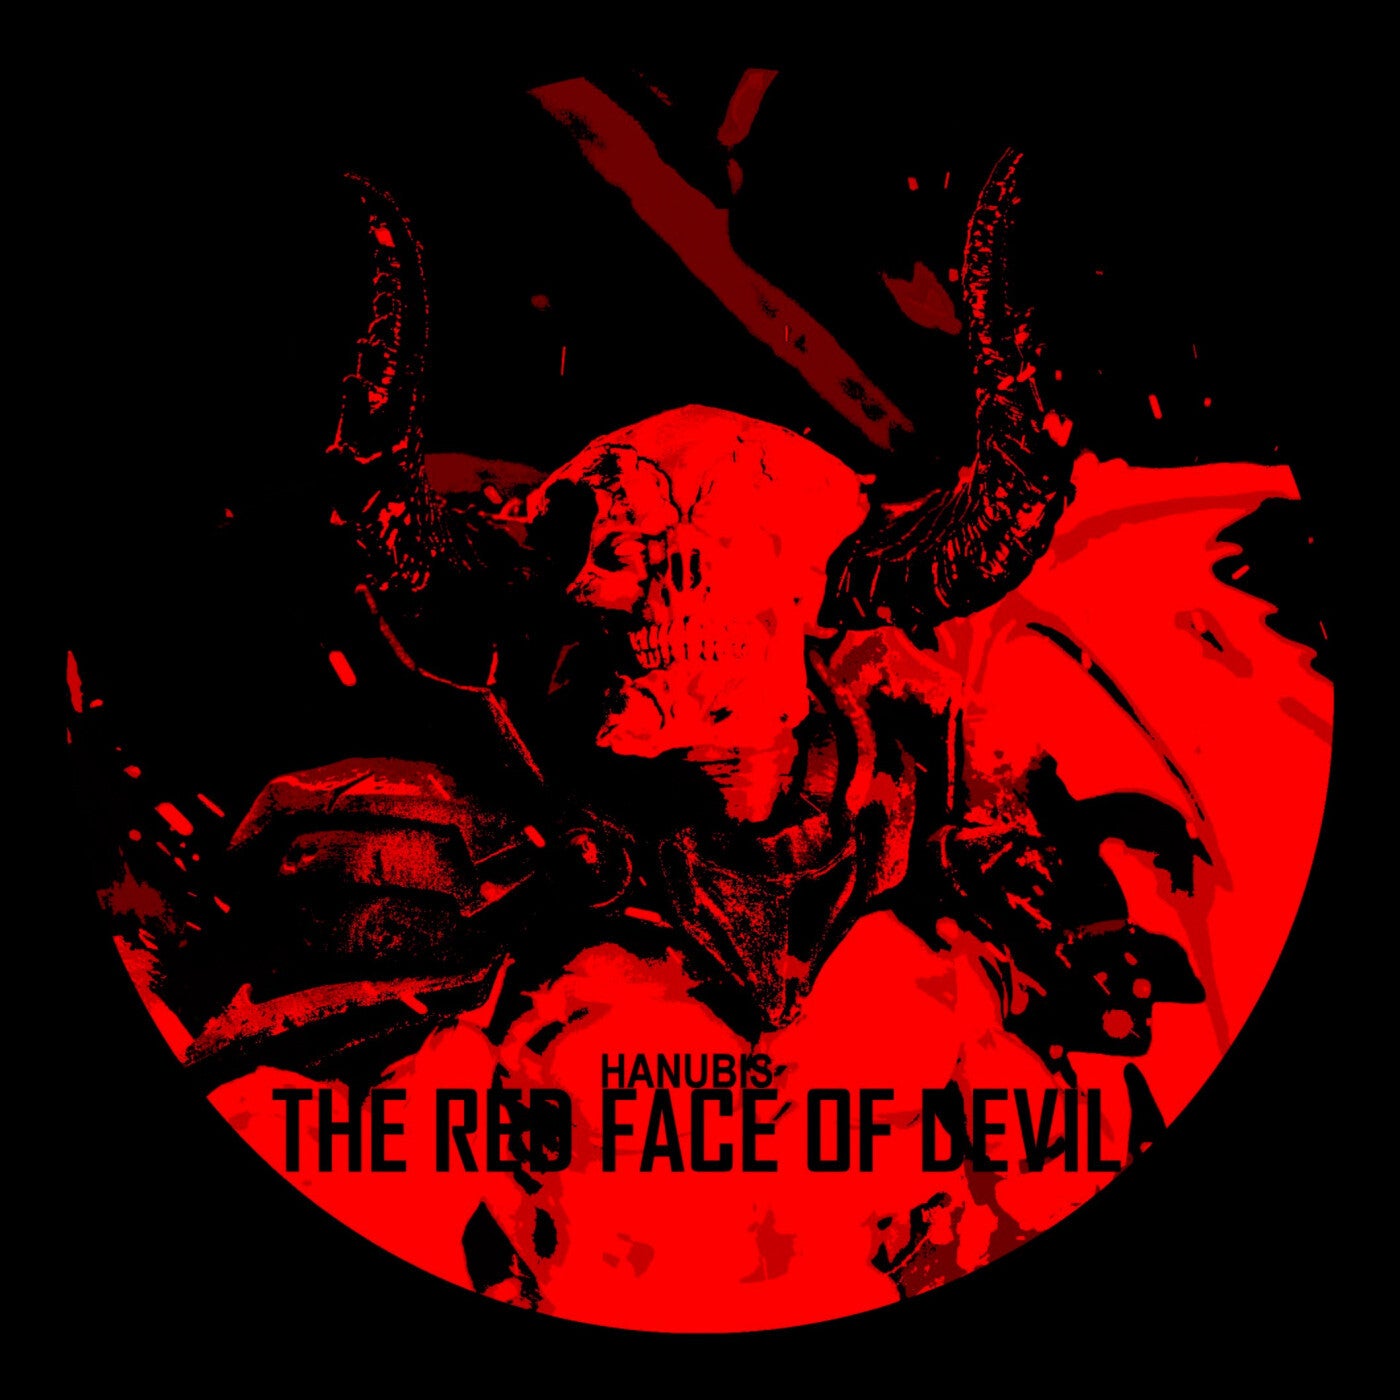 The Red Face Of Devil